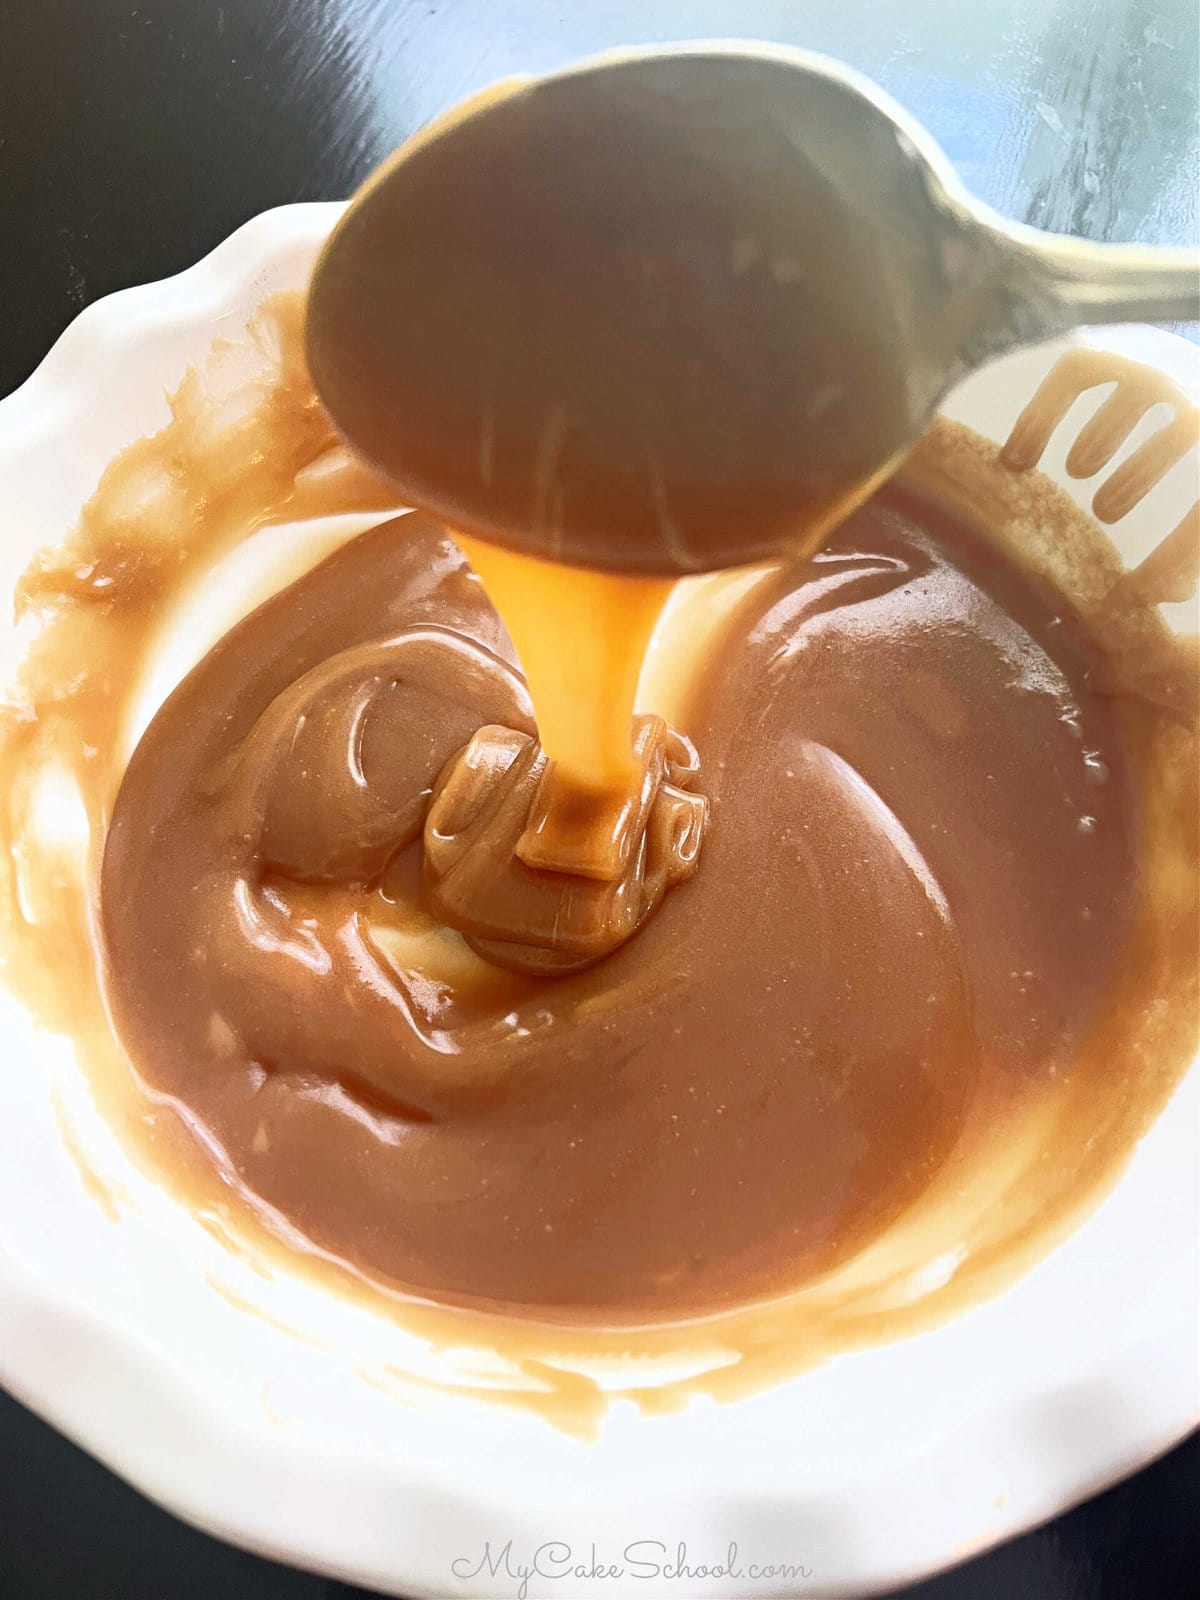 Bowl of homemade caramel sauce, with spoon.